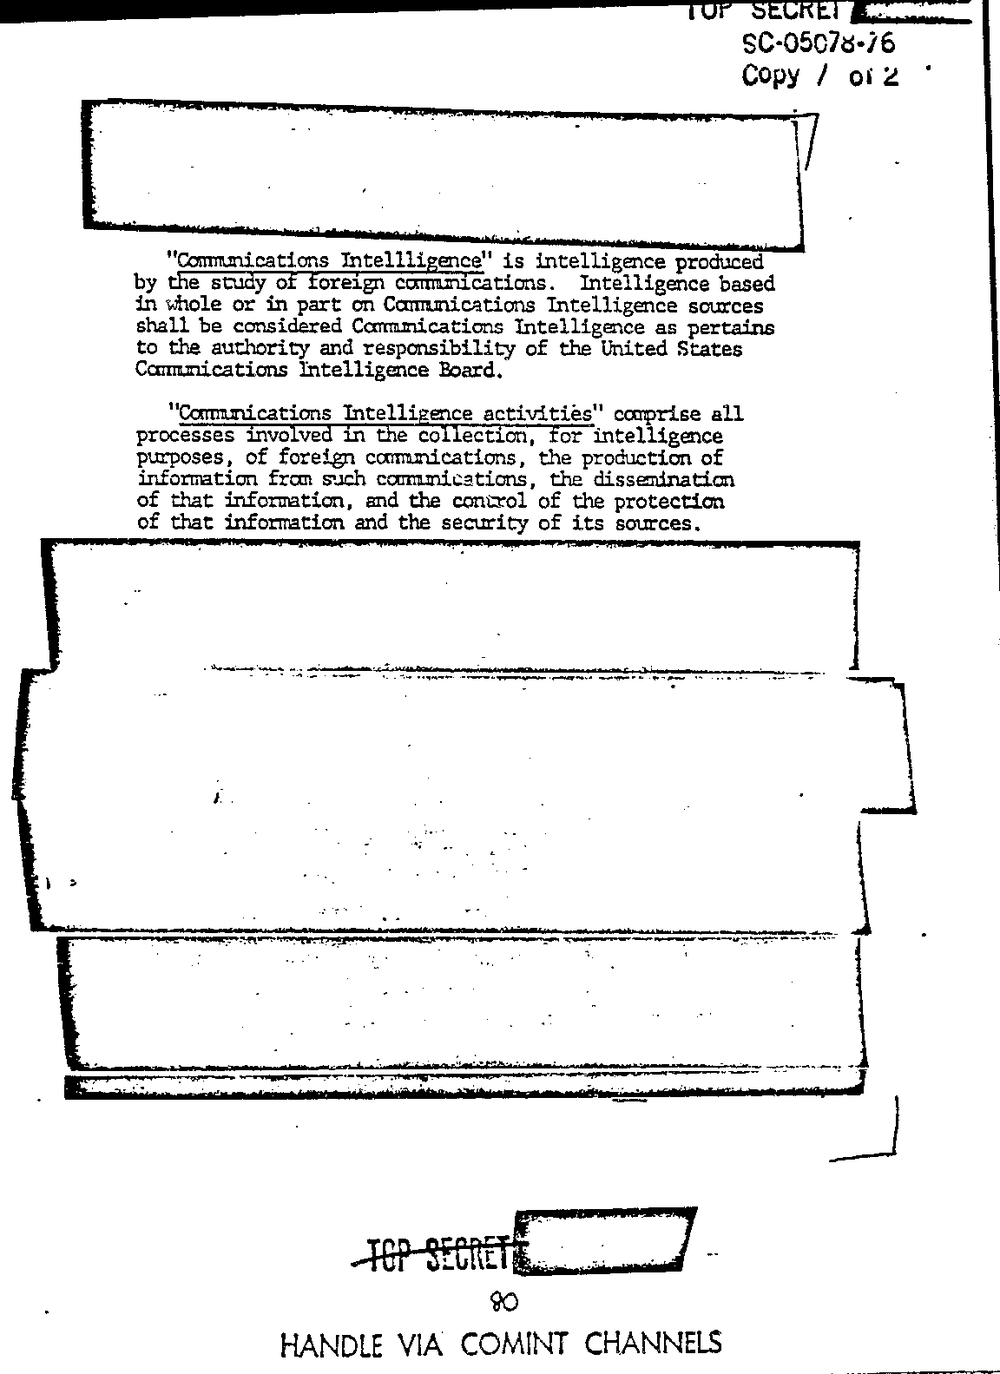 Page 88 from Report on Inquiry Into CIA Related Electronic Surveillance Activities